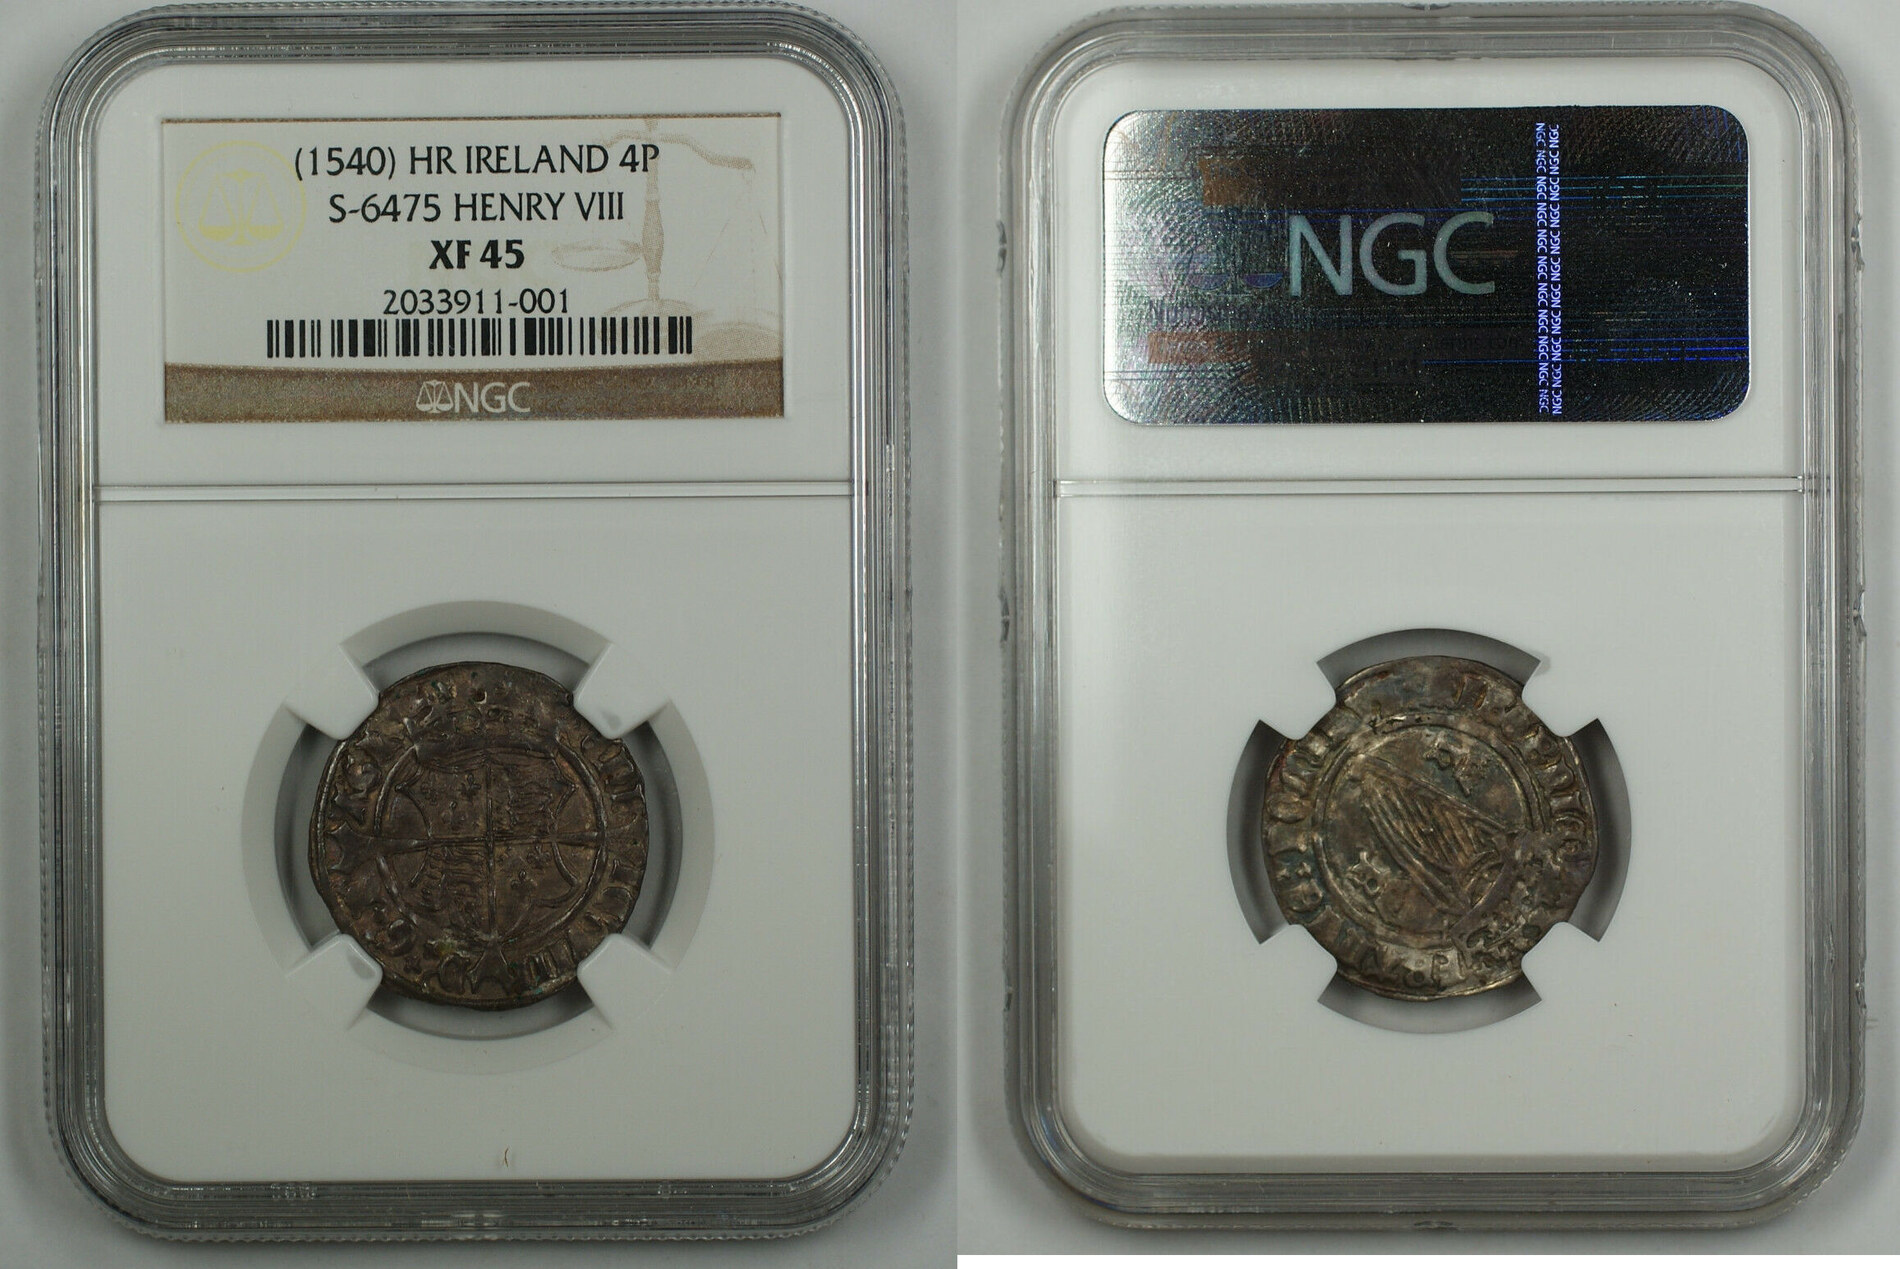 1540 HR Ireland 4P Silver Groat Coin S-6475 Henry VIII NGC XF 45 AKR XF ...